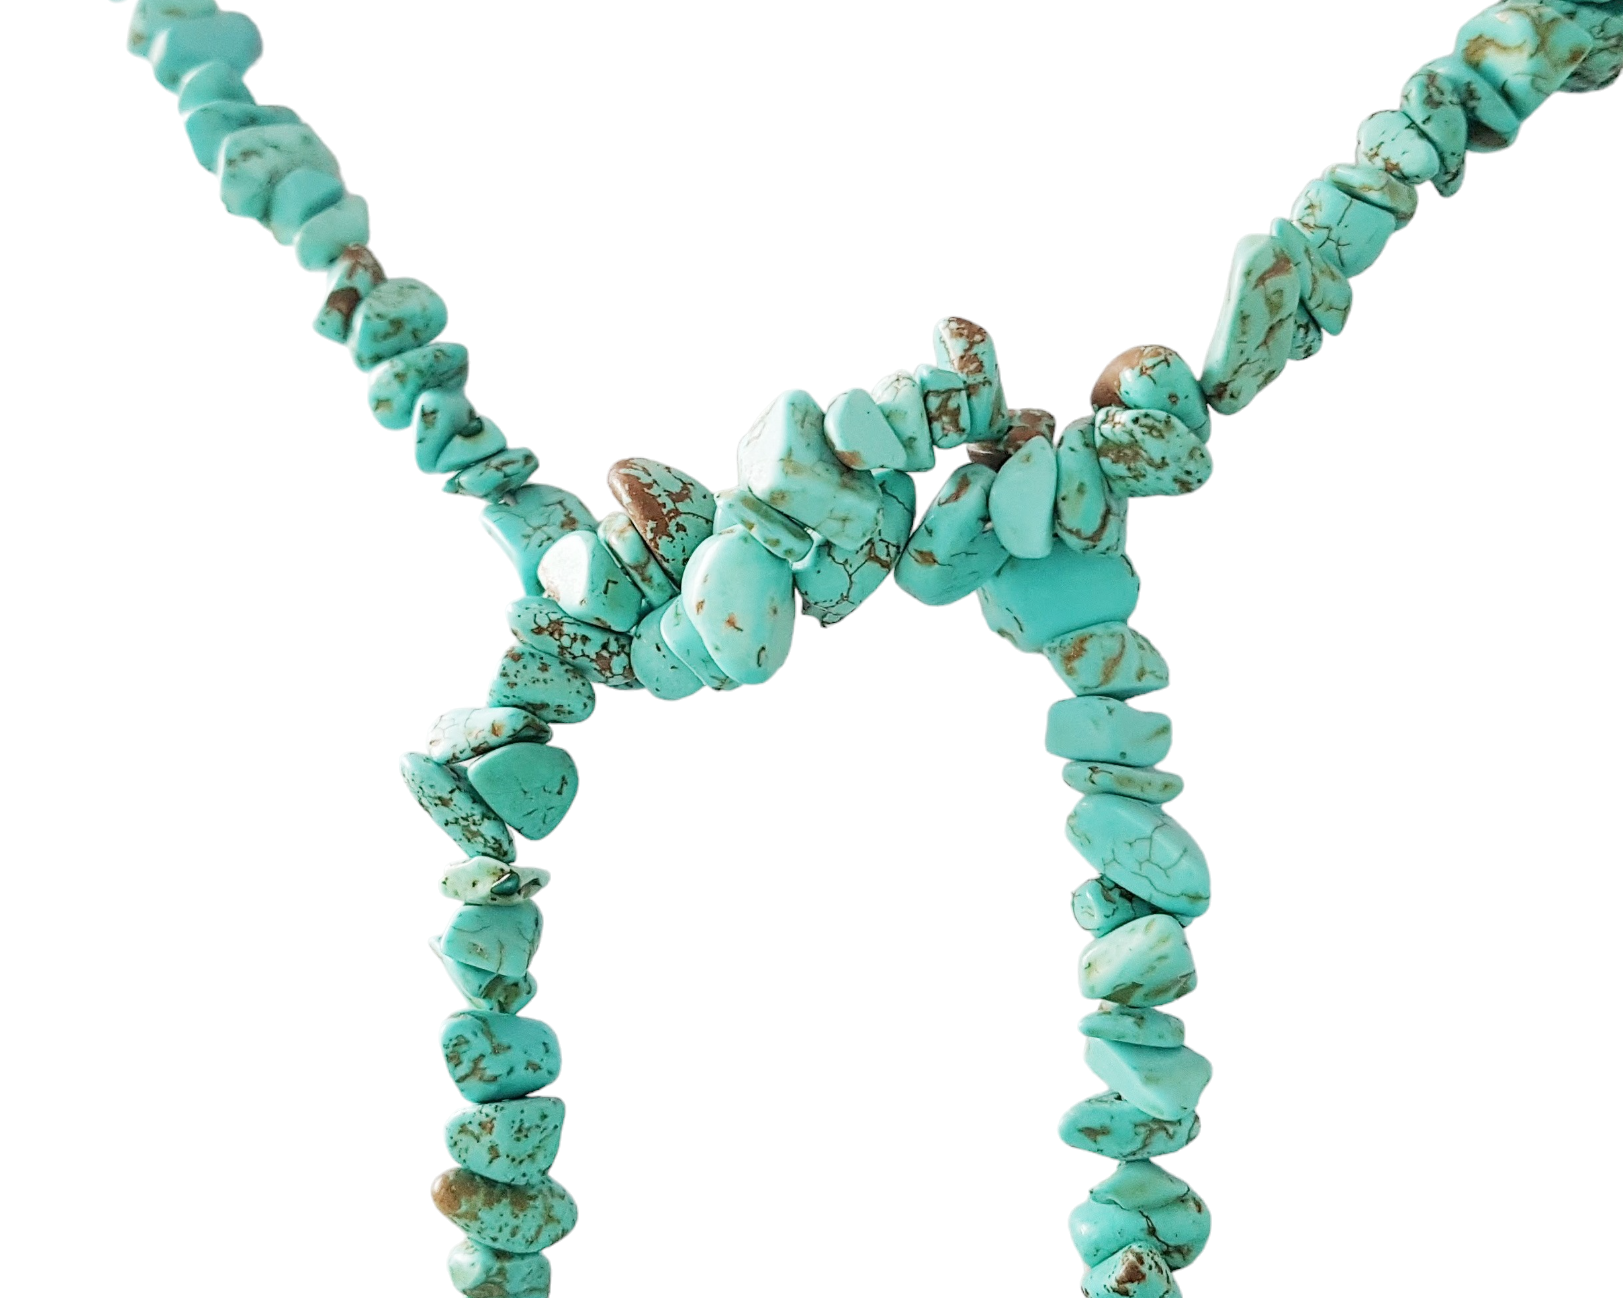 Bohemian Turquoise Lariat Necklace-Handcrafted-One of a Kind-Long Beaded Wrap Necklace